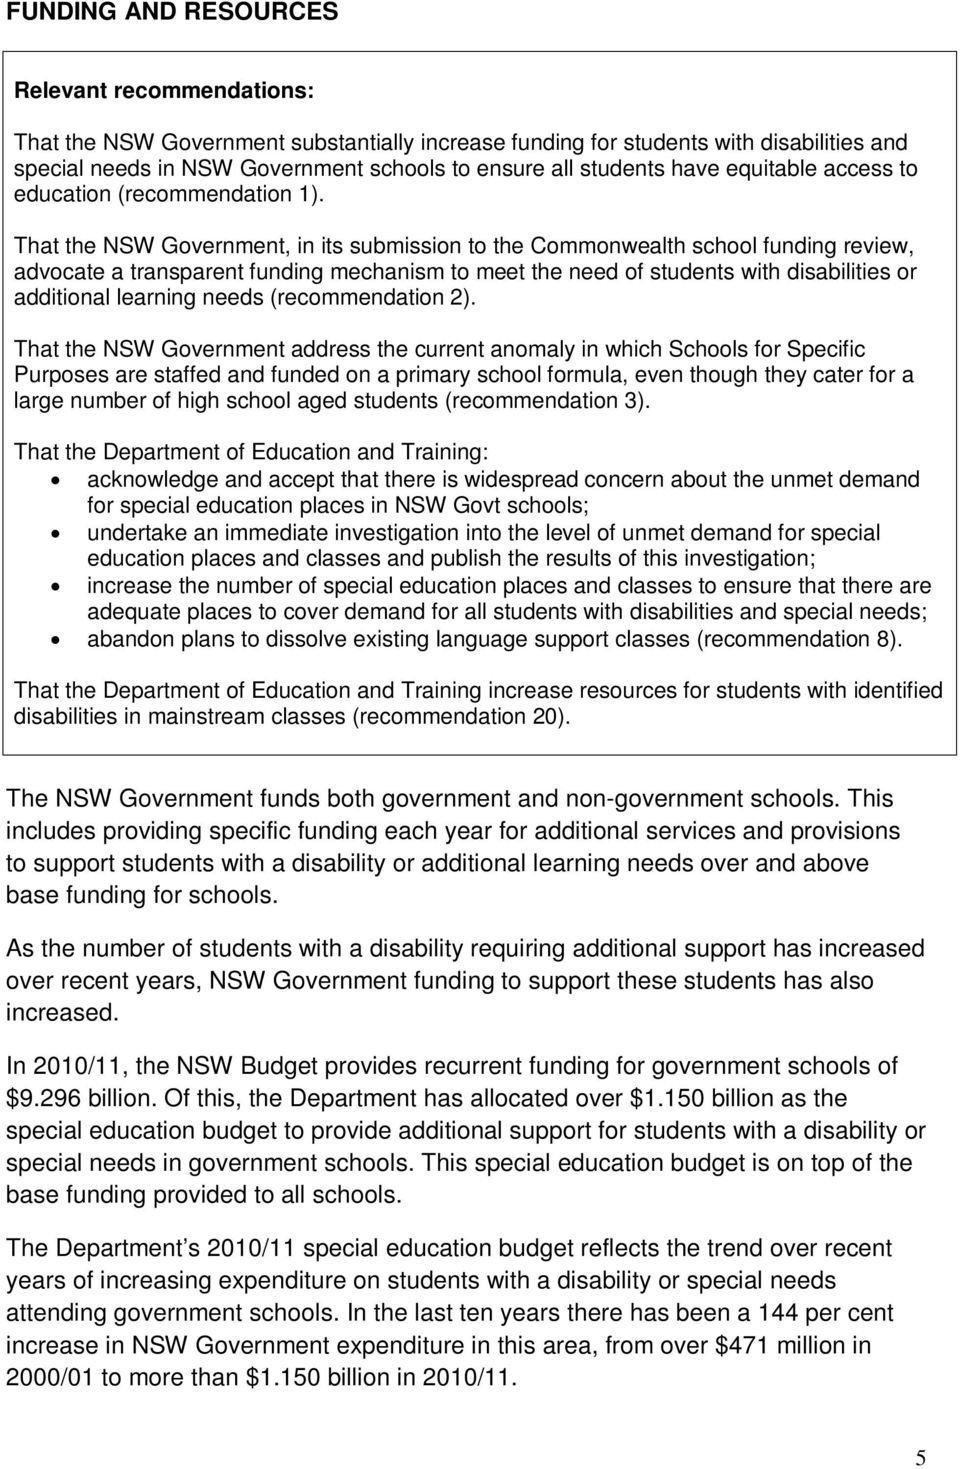 That the NSW Government, in its submission to the Commonwealth school funding review, advocate a transparent funding mechanism to meet the need of students with disabilities or additional learning